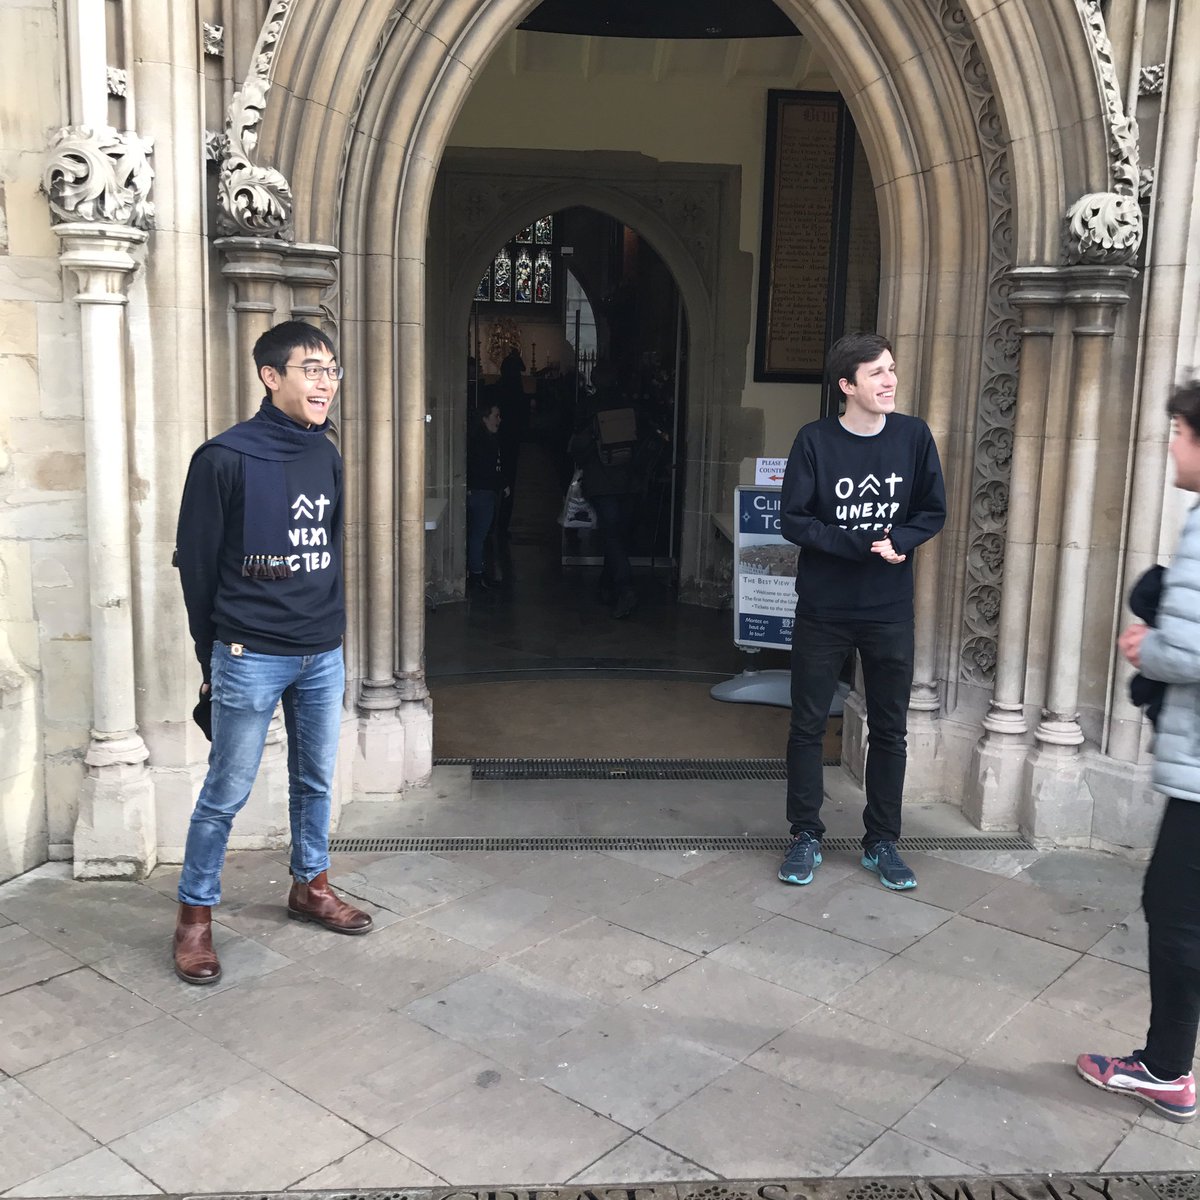 Cambridge Cu Another Great Lunchtime From Peterdray Thinking About The Unexpected Hope That Following Jesus Offers Unexpectedcambridge T Co Wqjyvur9ar